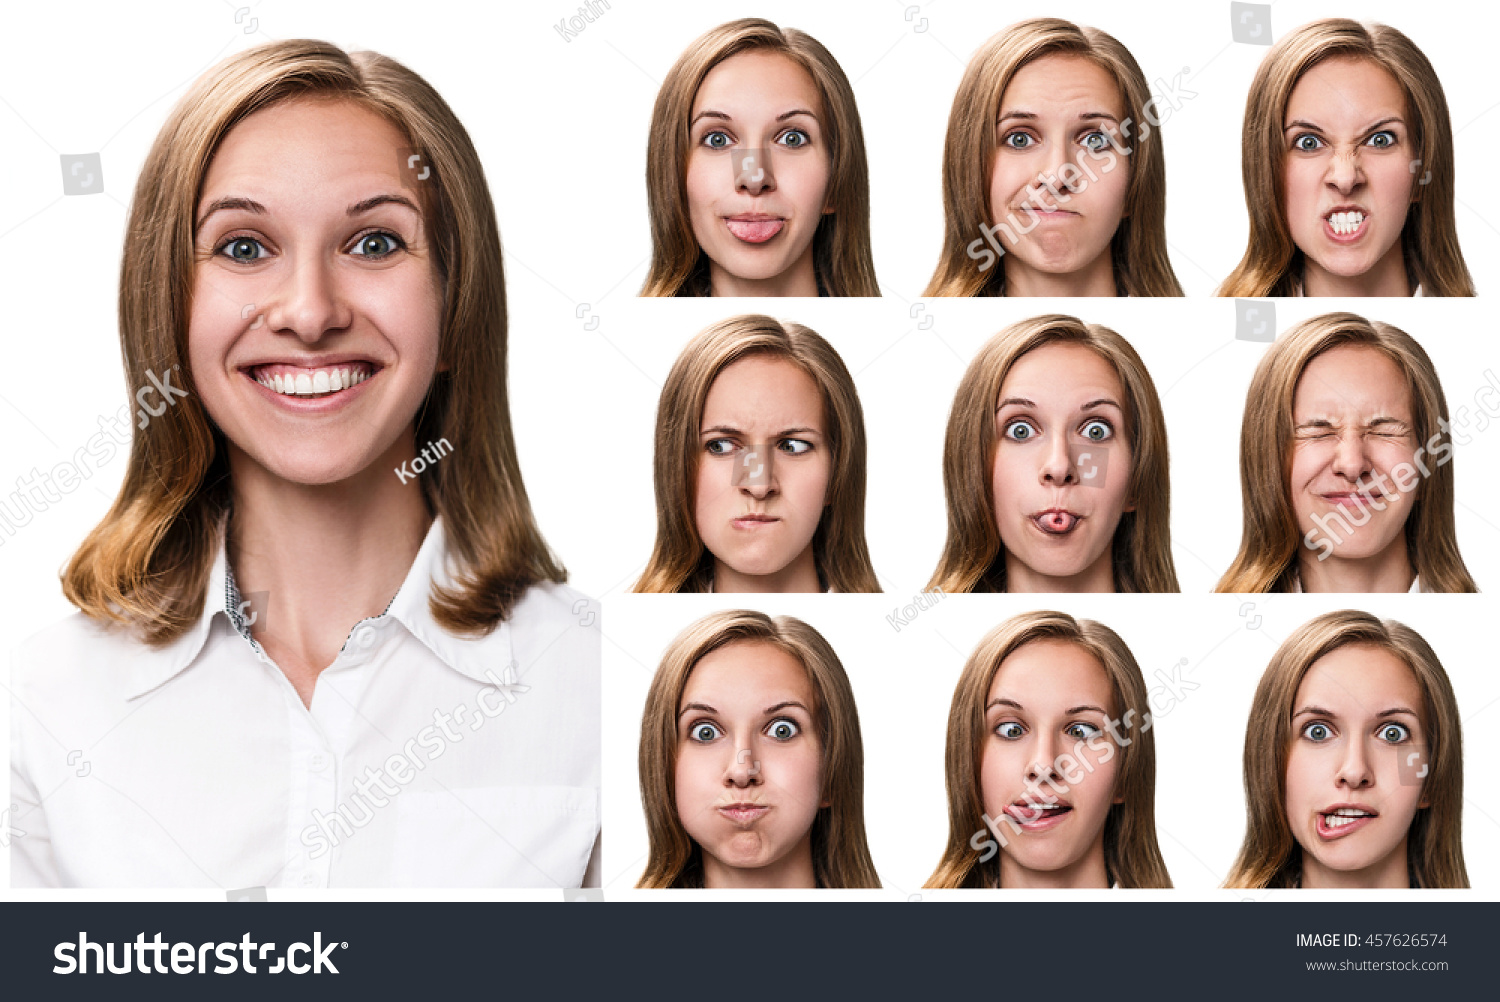 Woman with different facial expressions #457626574